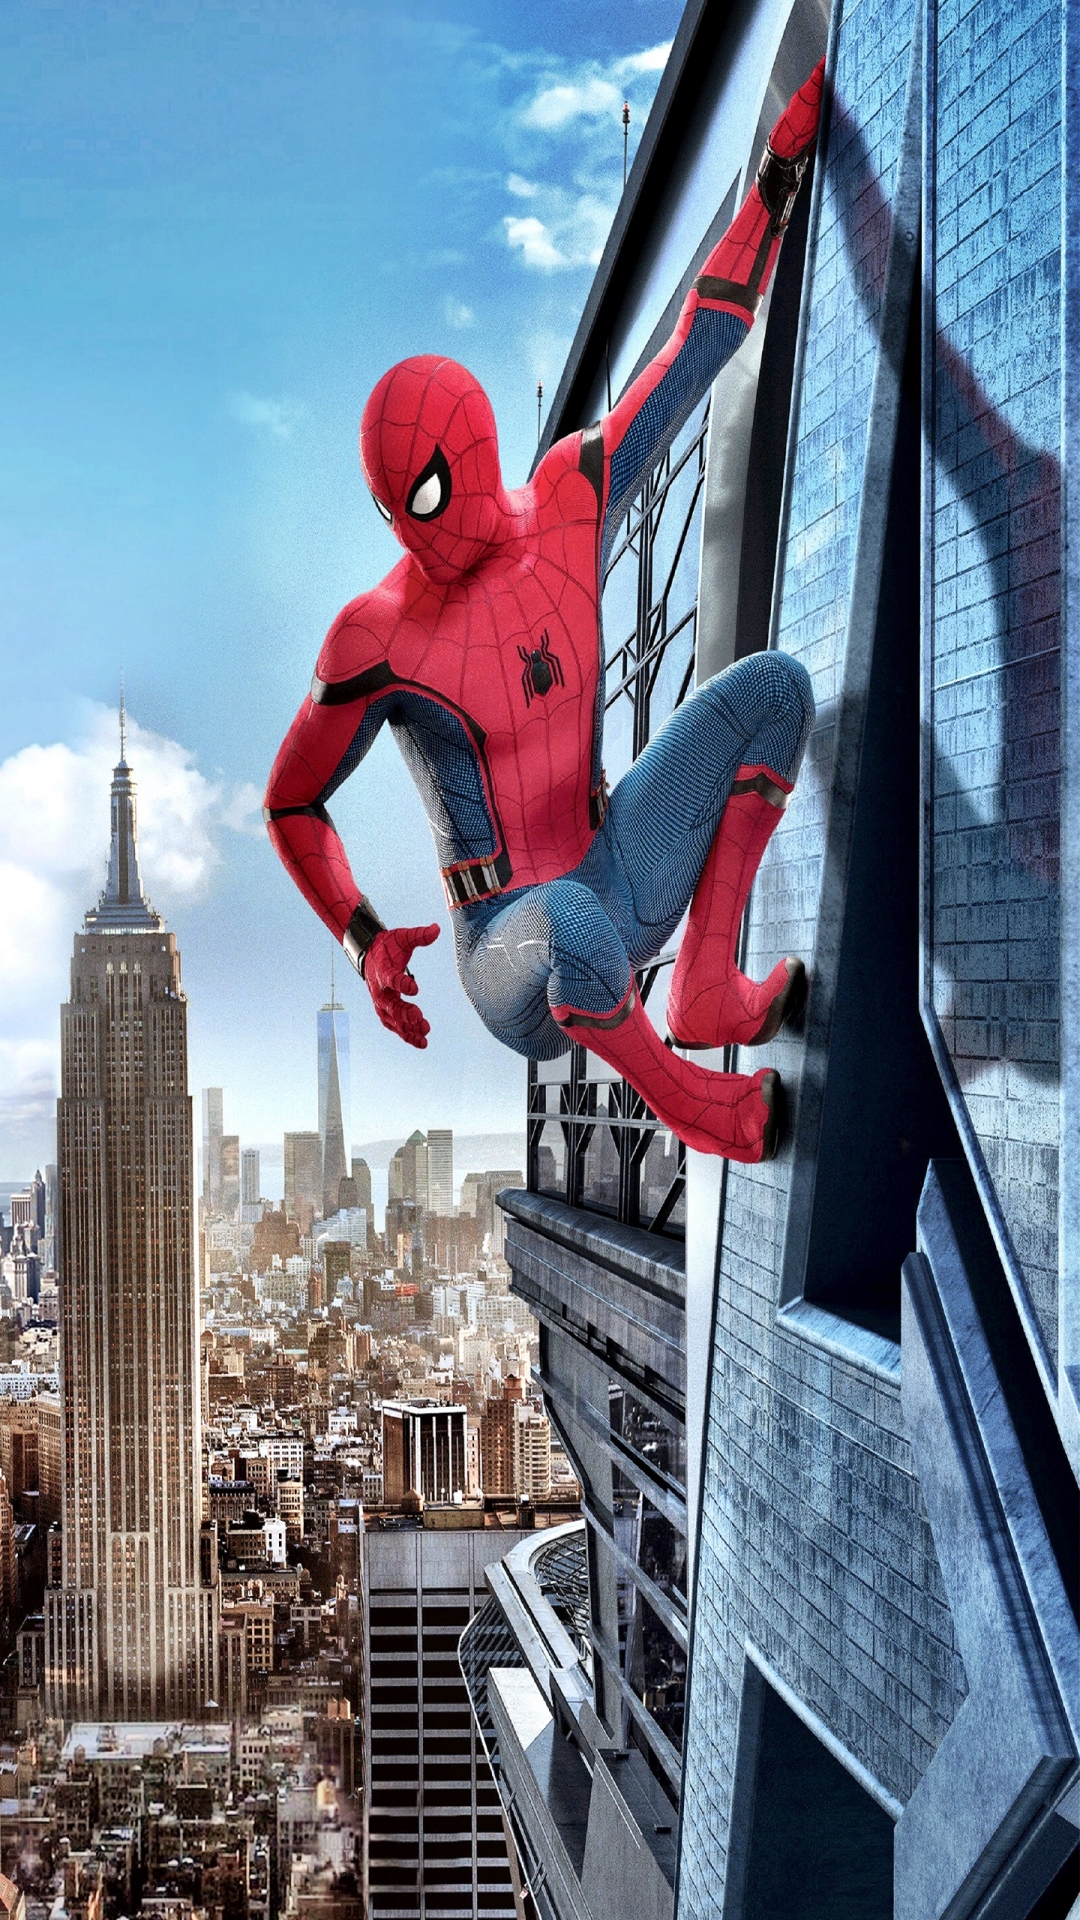 Spiderman Homecoming for Samsung A9 Pro & A7 resolution